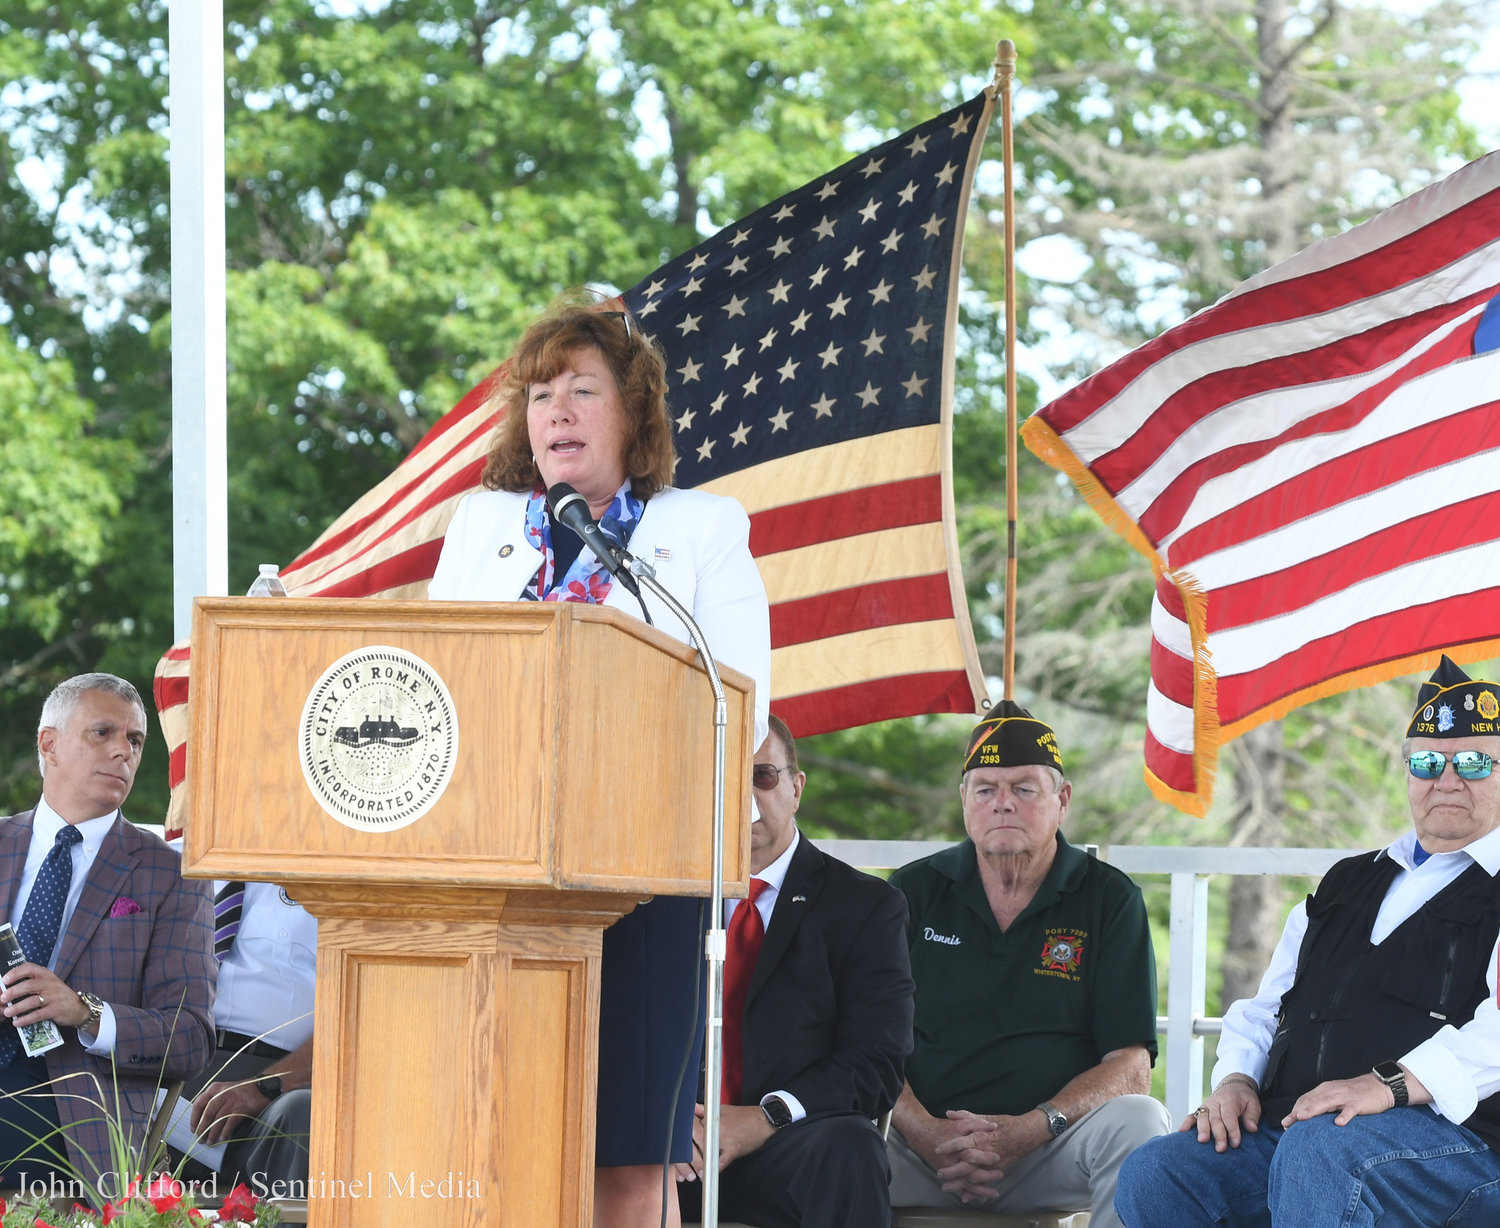 Assemblywoman Marianne Buttenschon speaks during the dedication ceremony on July 27, 2022.